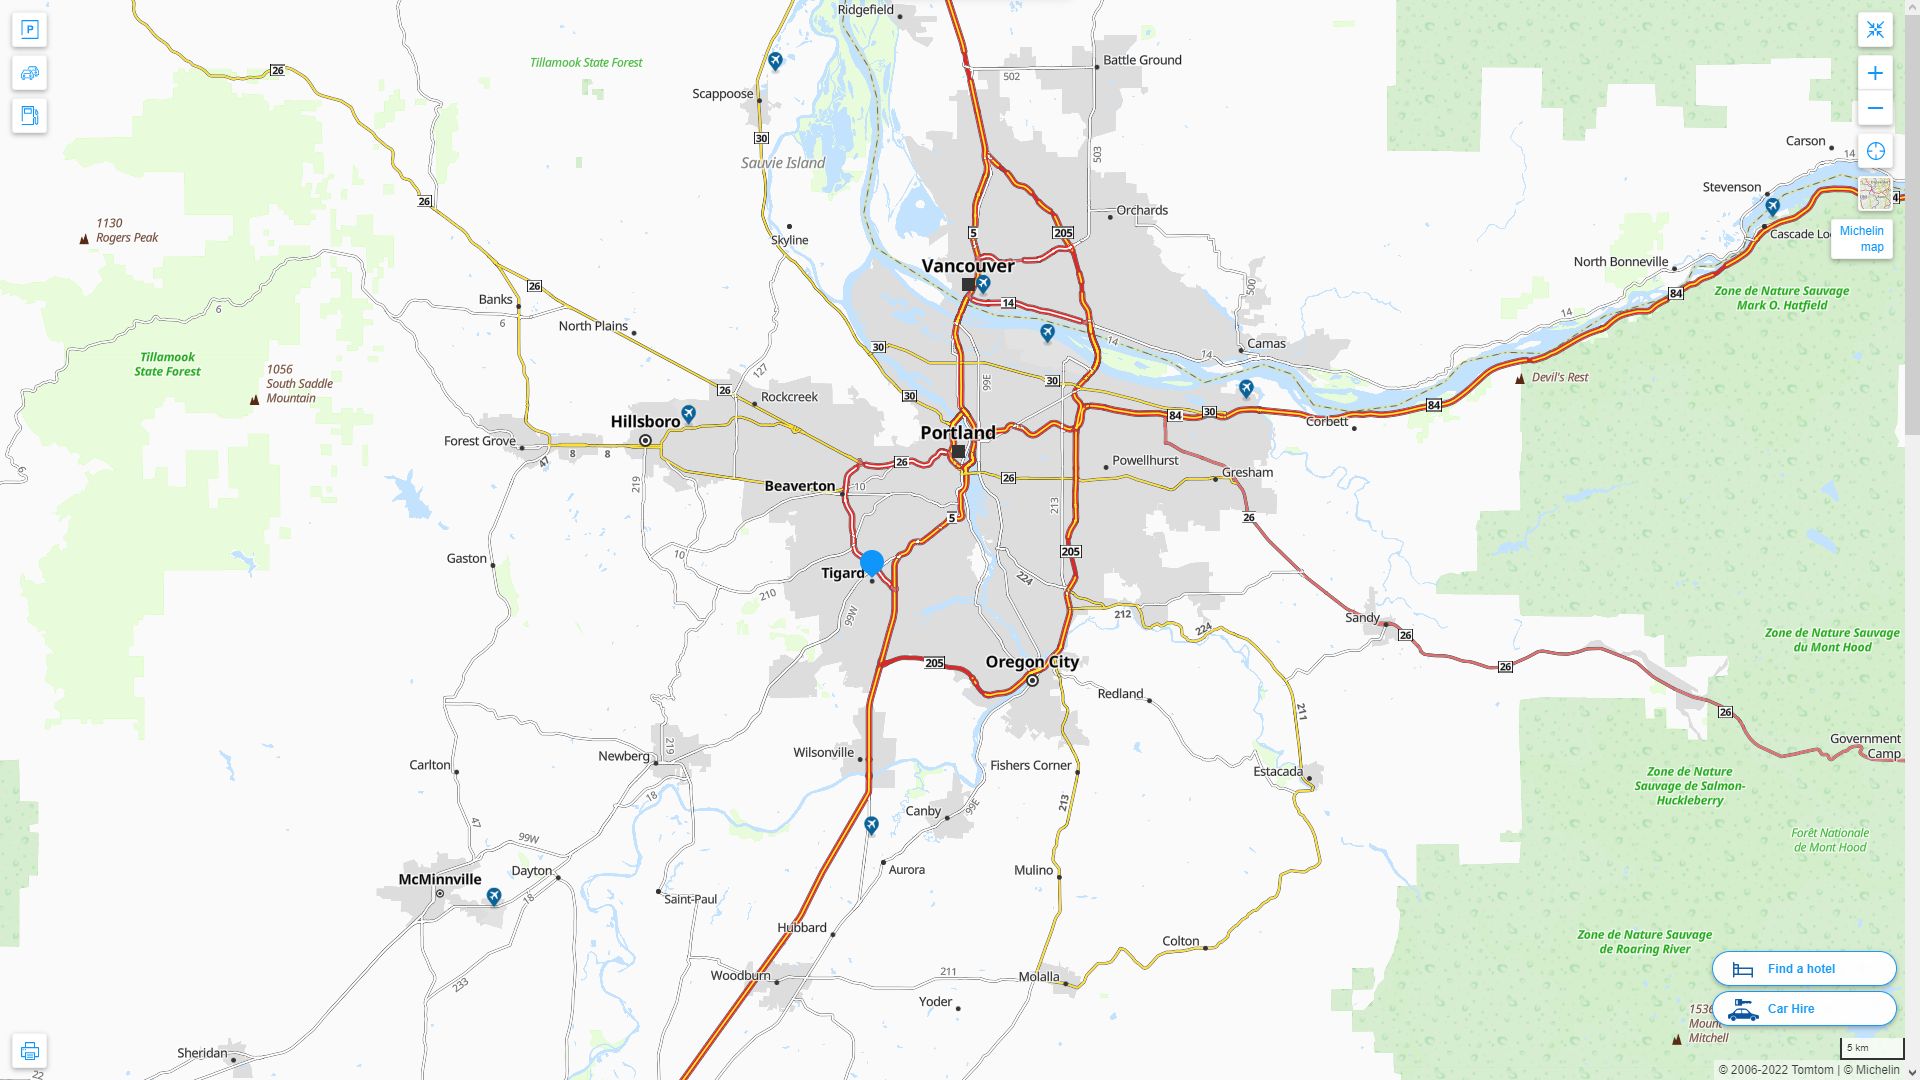 Tigard Oregon Highway and Road Map